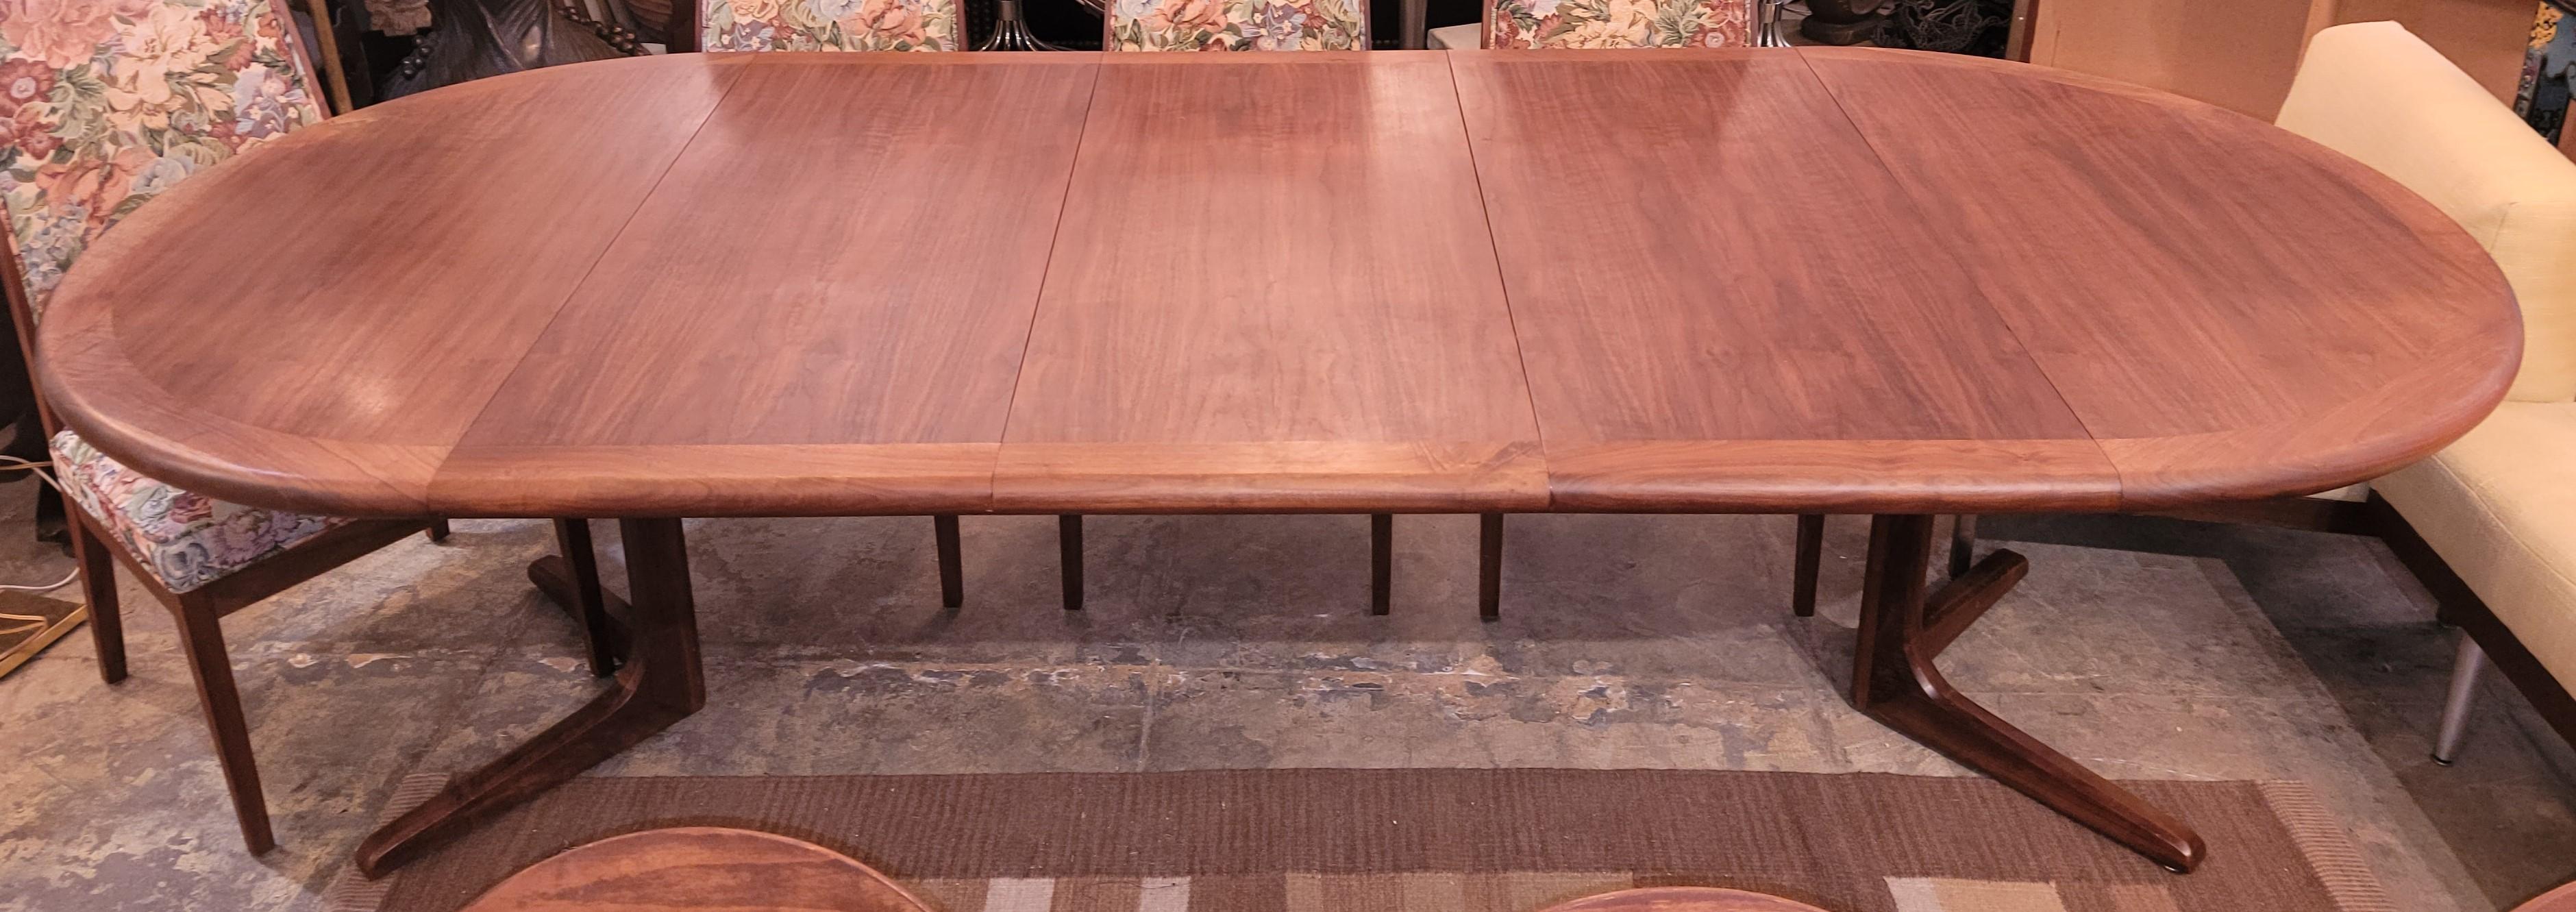 American Mid Century Rosewood Dinning Table By Glen Of California For Sale